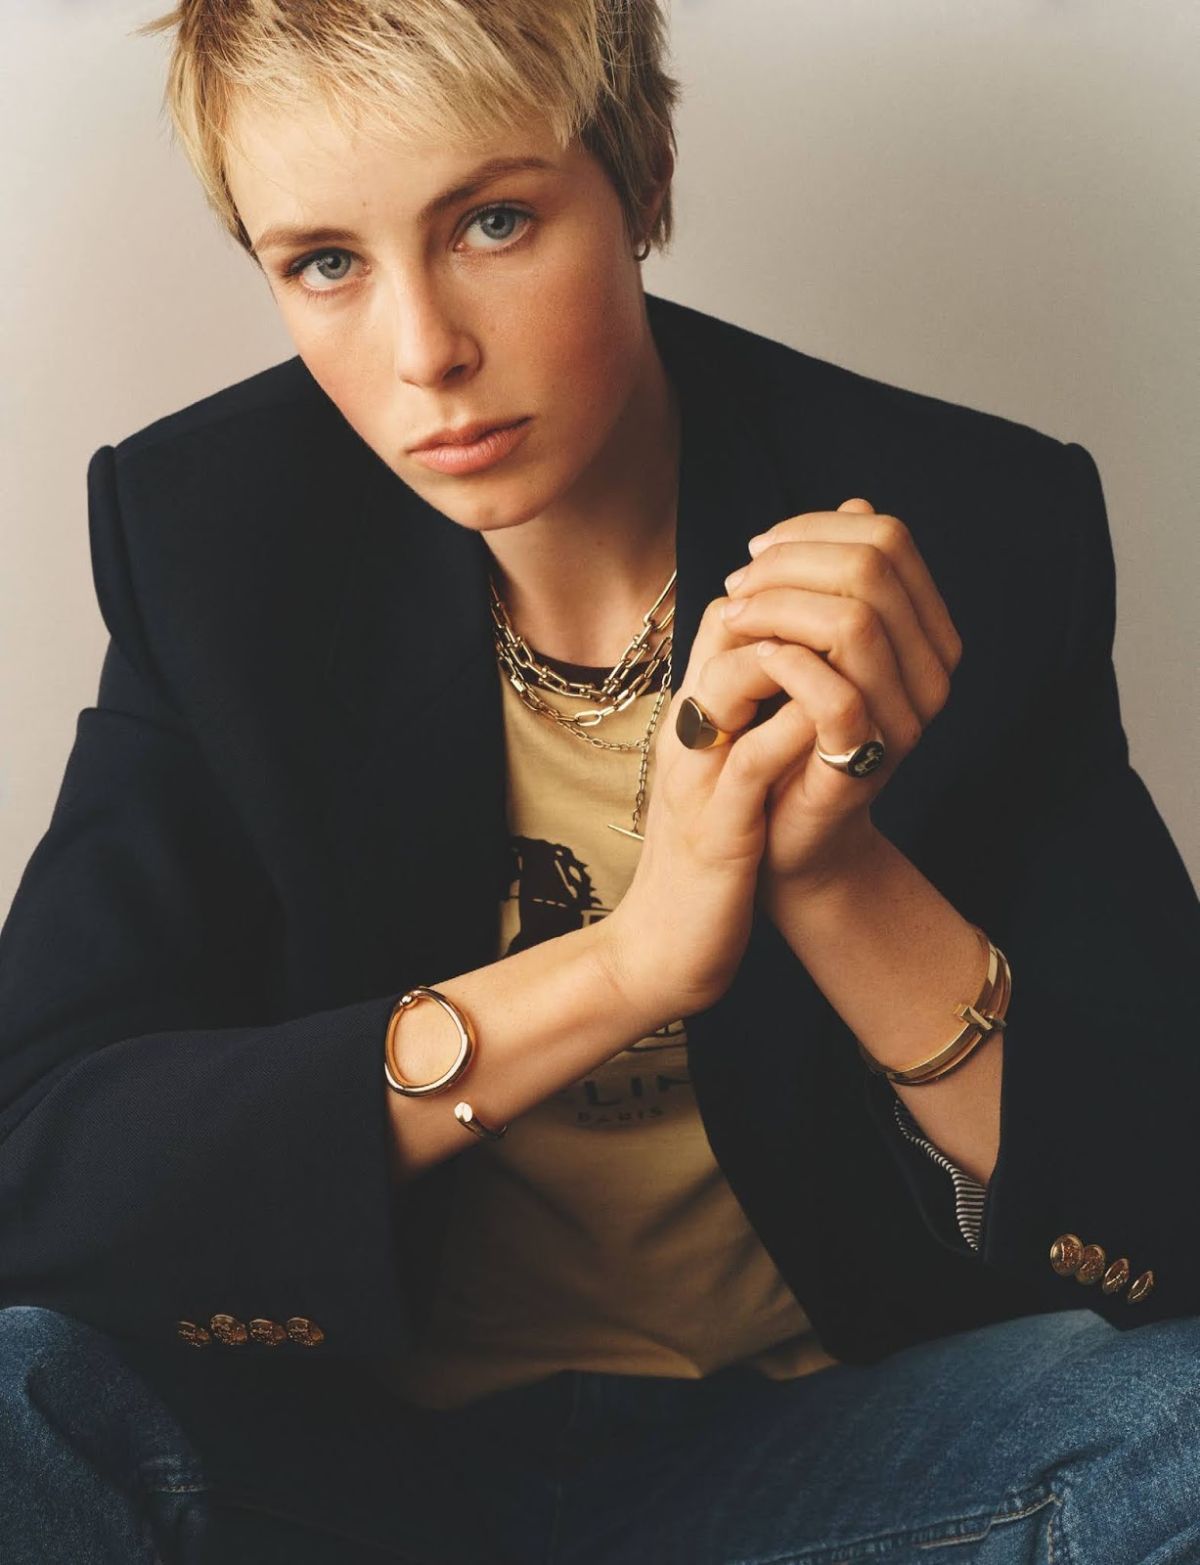 Edie Campbell by Scott Trindle for British Vogue May 2021. Clothing: Jacket, T-Shirt, Jeans by Celine; Jewelry by Stephen Webster, Annoushka, Zoe Chicco, Tiffany & Co., Pomellato, Rebus, Ferian